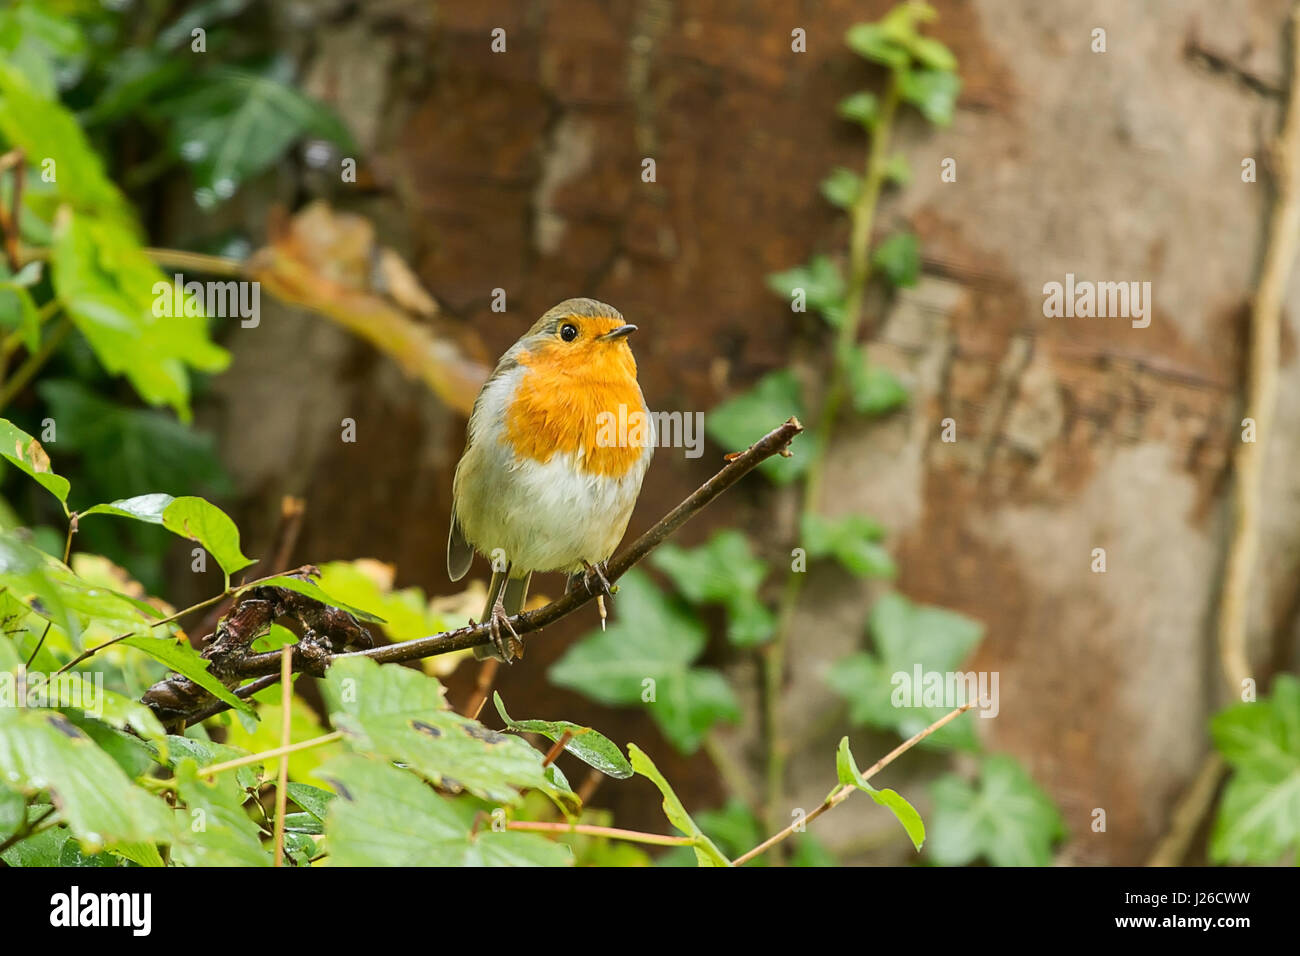 photo of a beautiful little Robin redbreast sitting on a branch Stock Photo